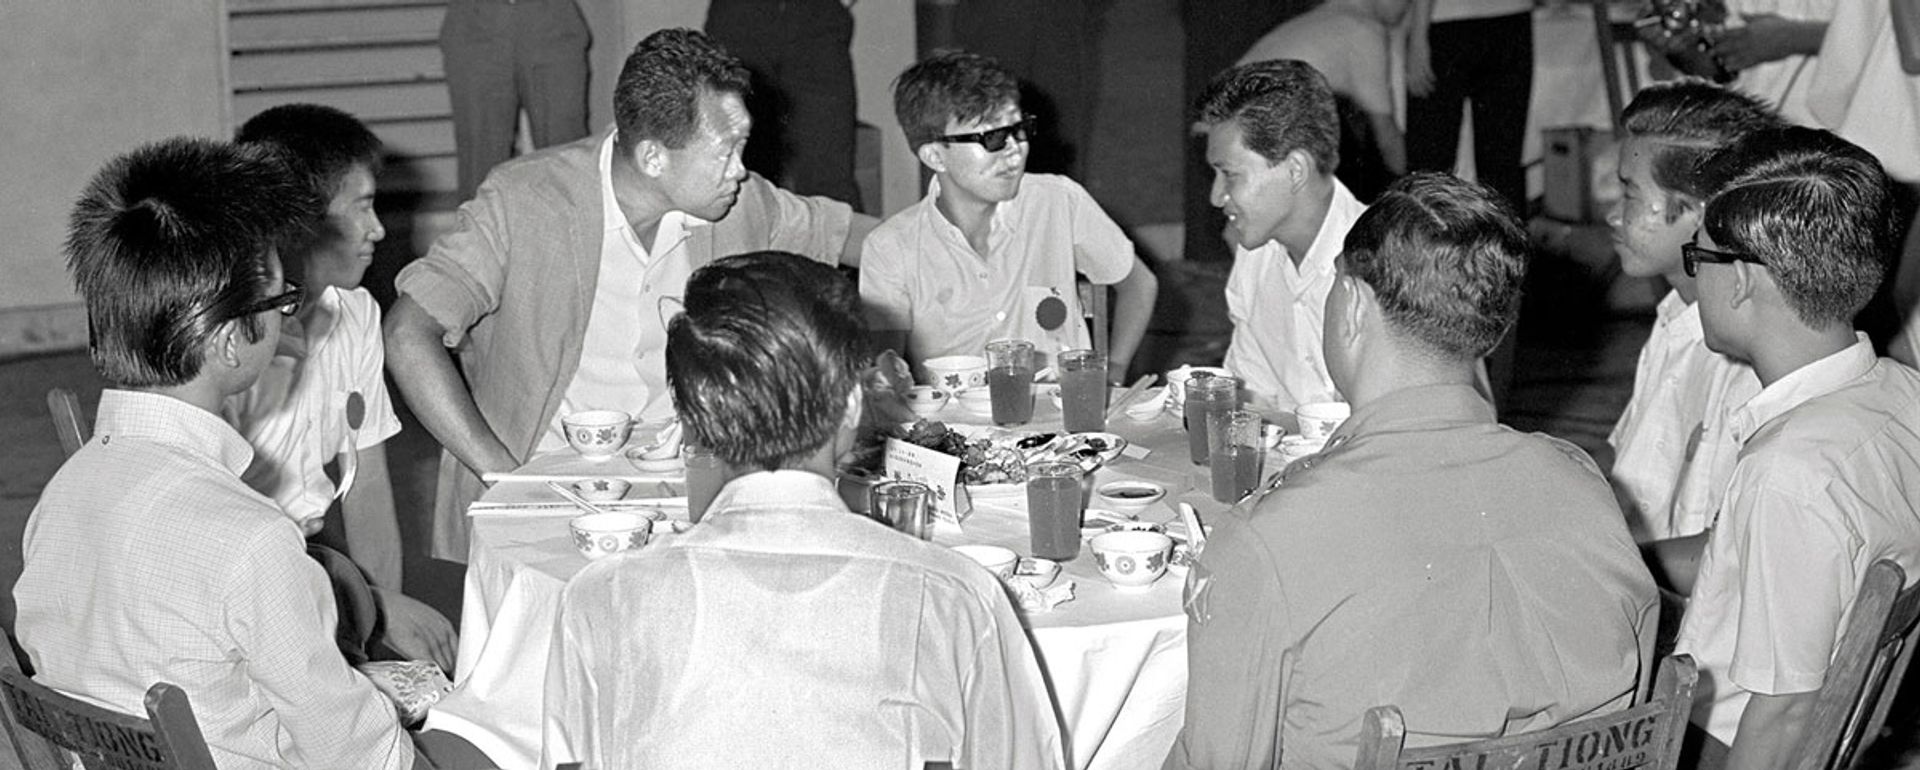 Mr Lee talking to enlisted national servicemen at a sending-off dinner in Tanjong Pagar on Aug 29, 1967. To strengthen Singapore’s security and defence, Mr Lee introduced a law in 1967 requiring all male Singapore citizens and permanent residents aged 18 and above to do national service. To boost the morale of those enlisted, sending-off parties were organised in all constituencies. ST Photo: Low Yew Kong